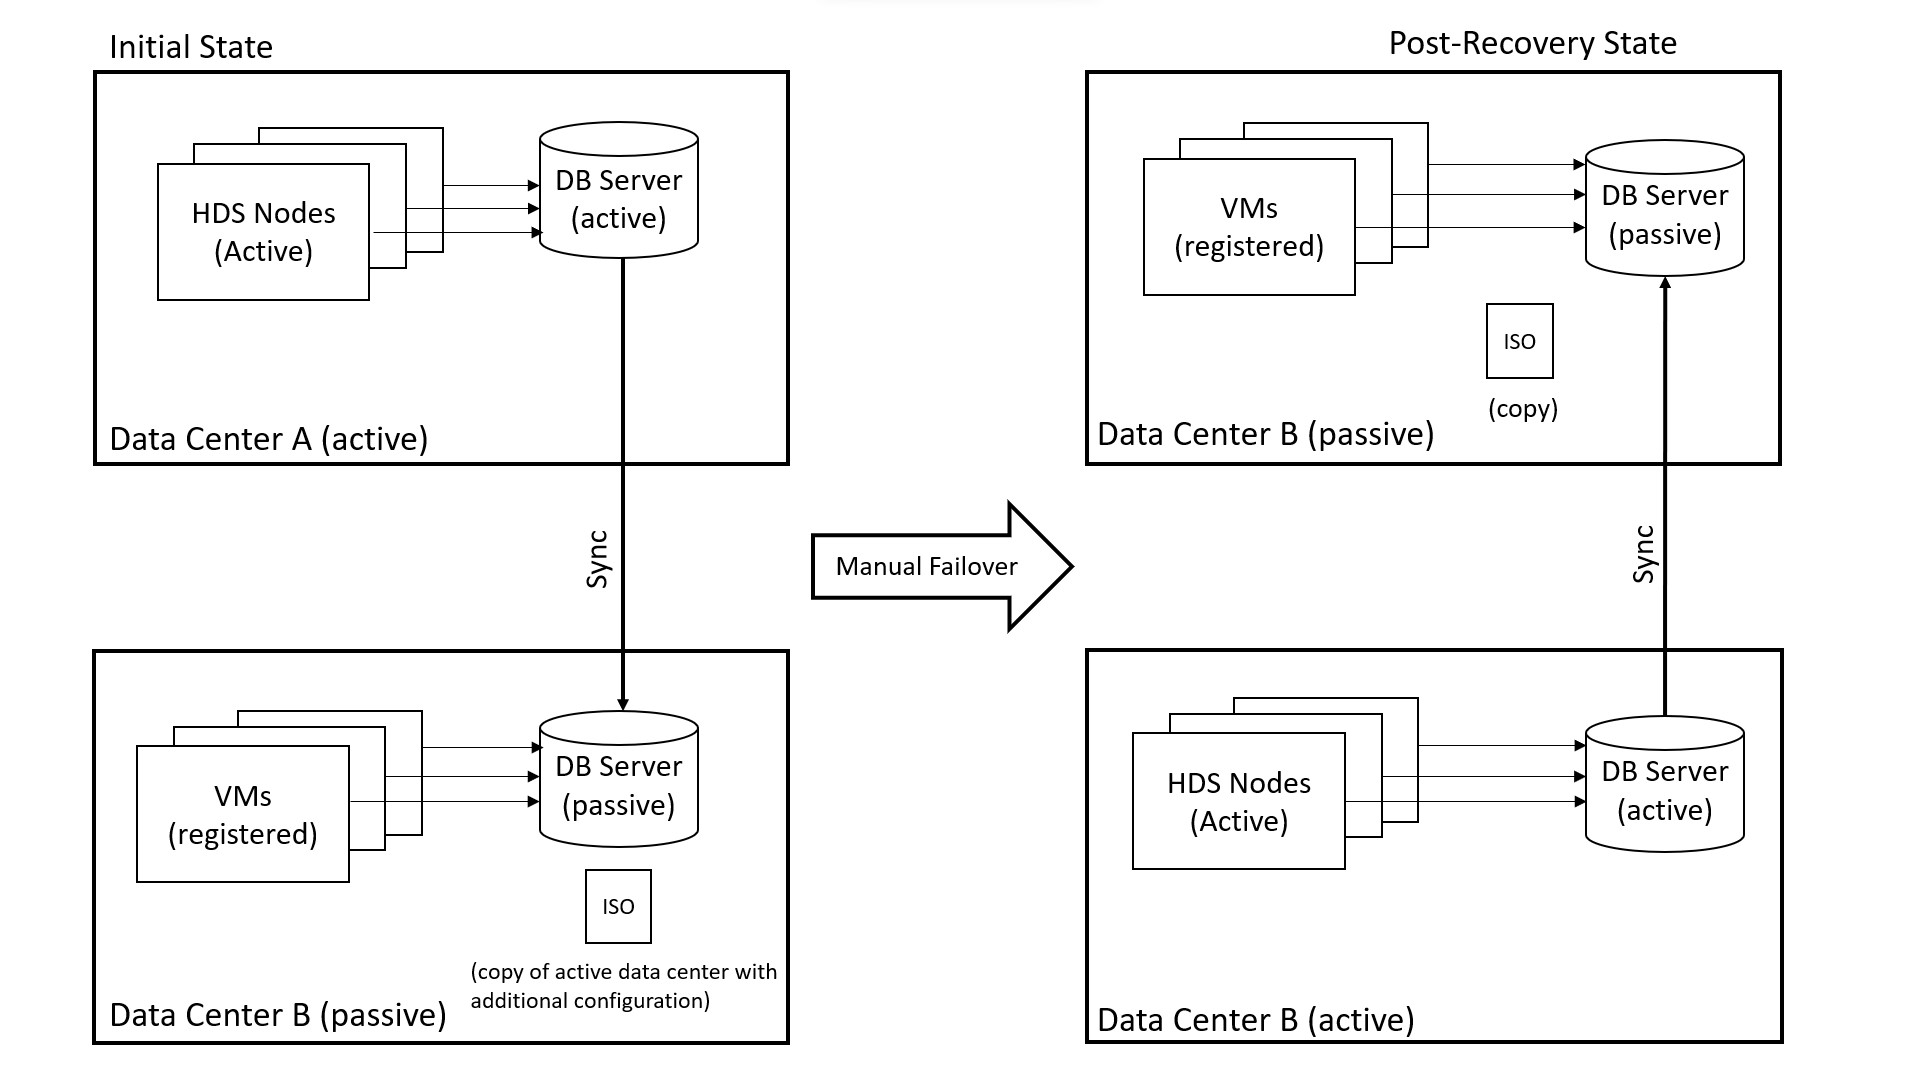 Before failover, Data Center A has active HDS nodes and the primary PostgreSQL or Microsoft SQL Server database, while B has a copy of the ISO file with additional configurations, VMs that are registered to the organization, and a standby database. After failover, Data Center B has active HDS nodes and the primary database, while A has unregistered VMs and a copy of the ISO file, and the database is in standby mode.